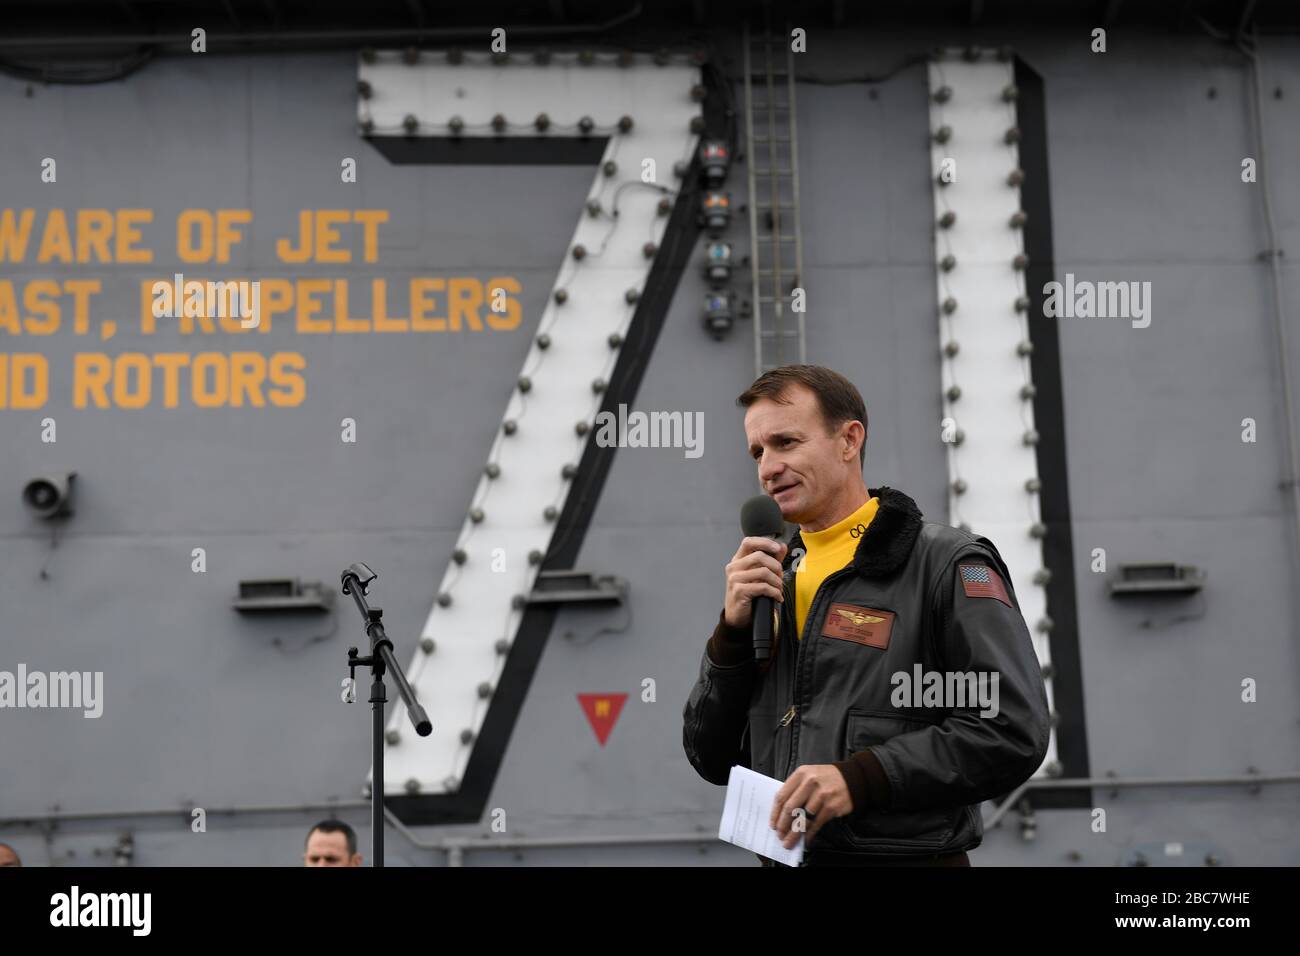 U.S. Navy Capt. Brett Crozier, commanding officer of the aircraft carrier USS Theodore Roosevelt, addresses the crew during an all-hands call on the flight deck November 15, 2019 in Eastern Pacific Ocean. Crozier was relieved of duty March 31, 2020 after writing a four-page letter to his superiors, pleading with them to take action to help stem the spread of COVID-19 cases on his ship. Stock Photo